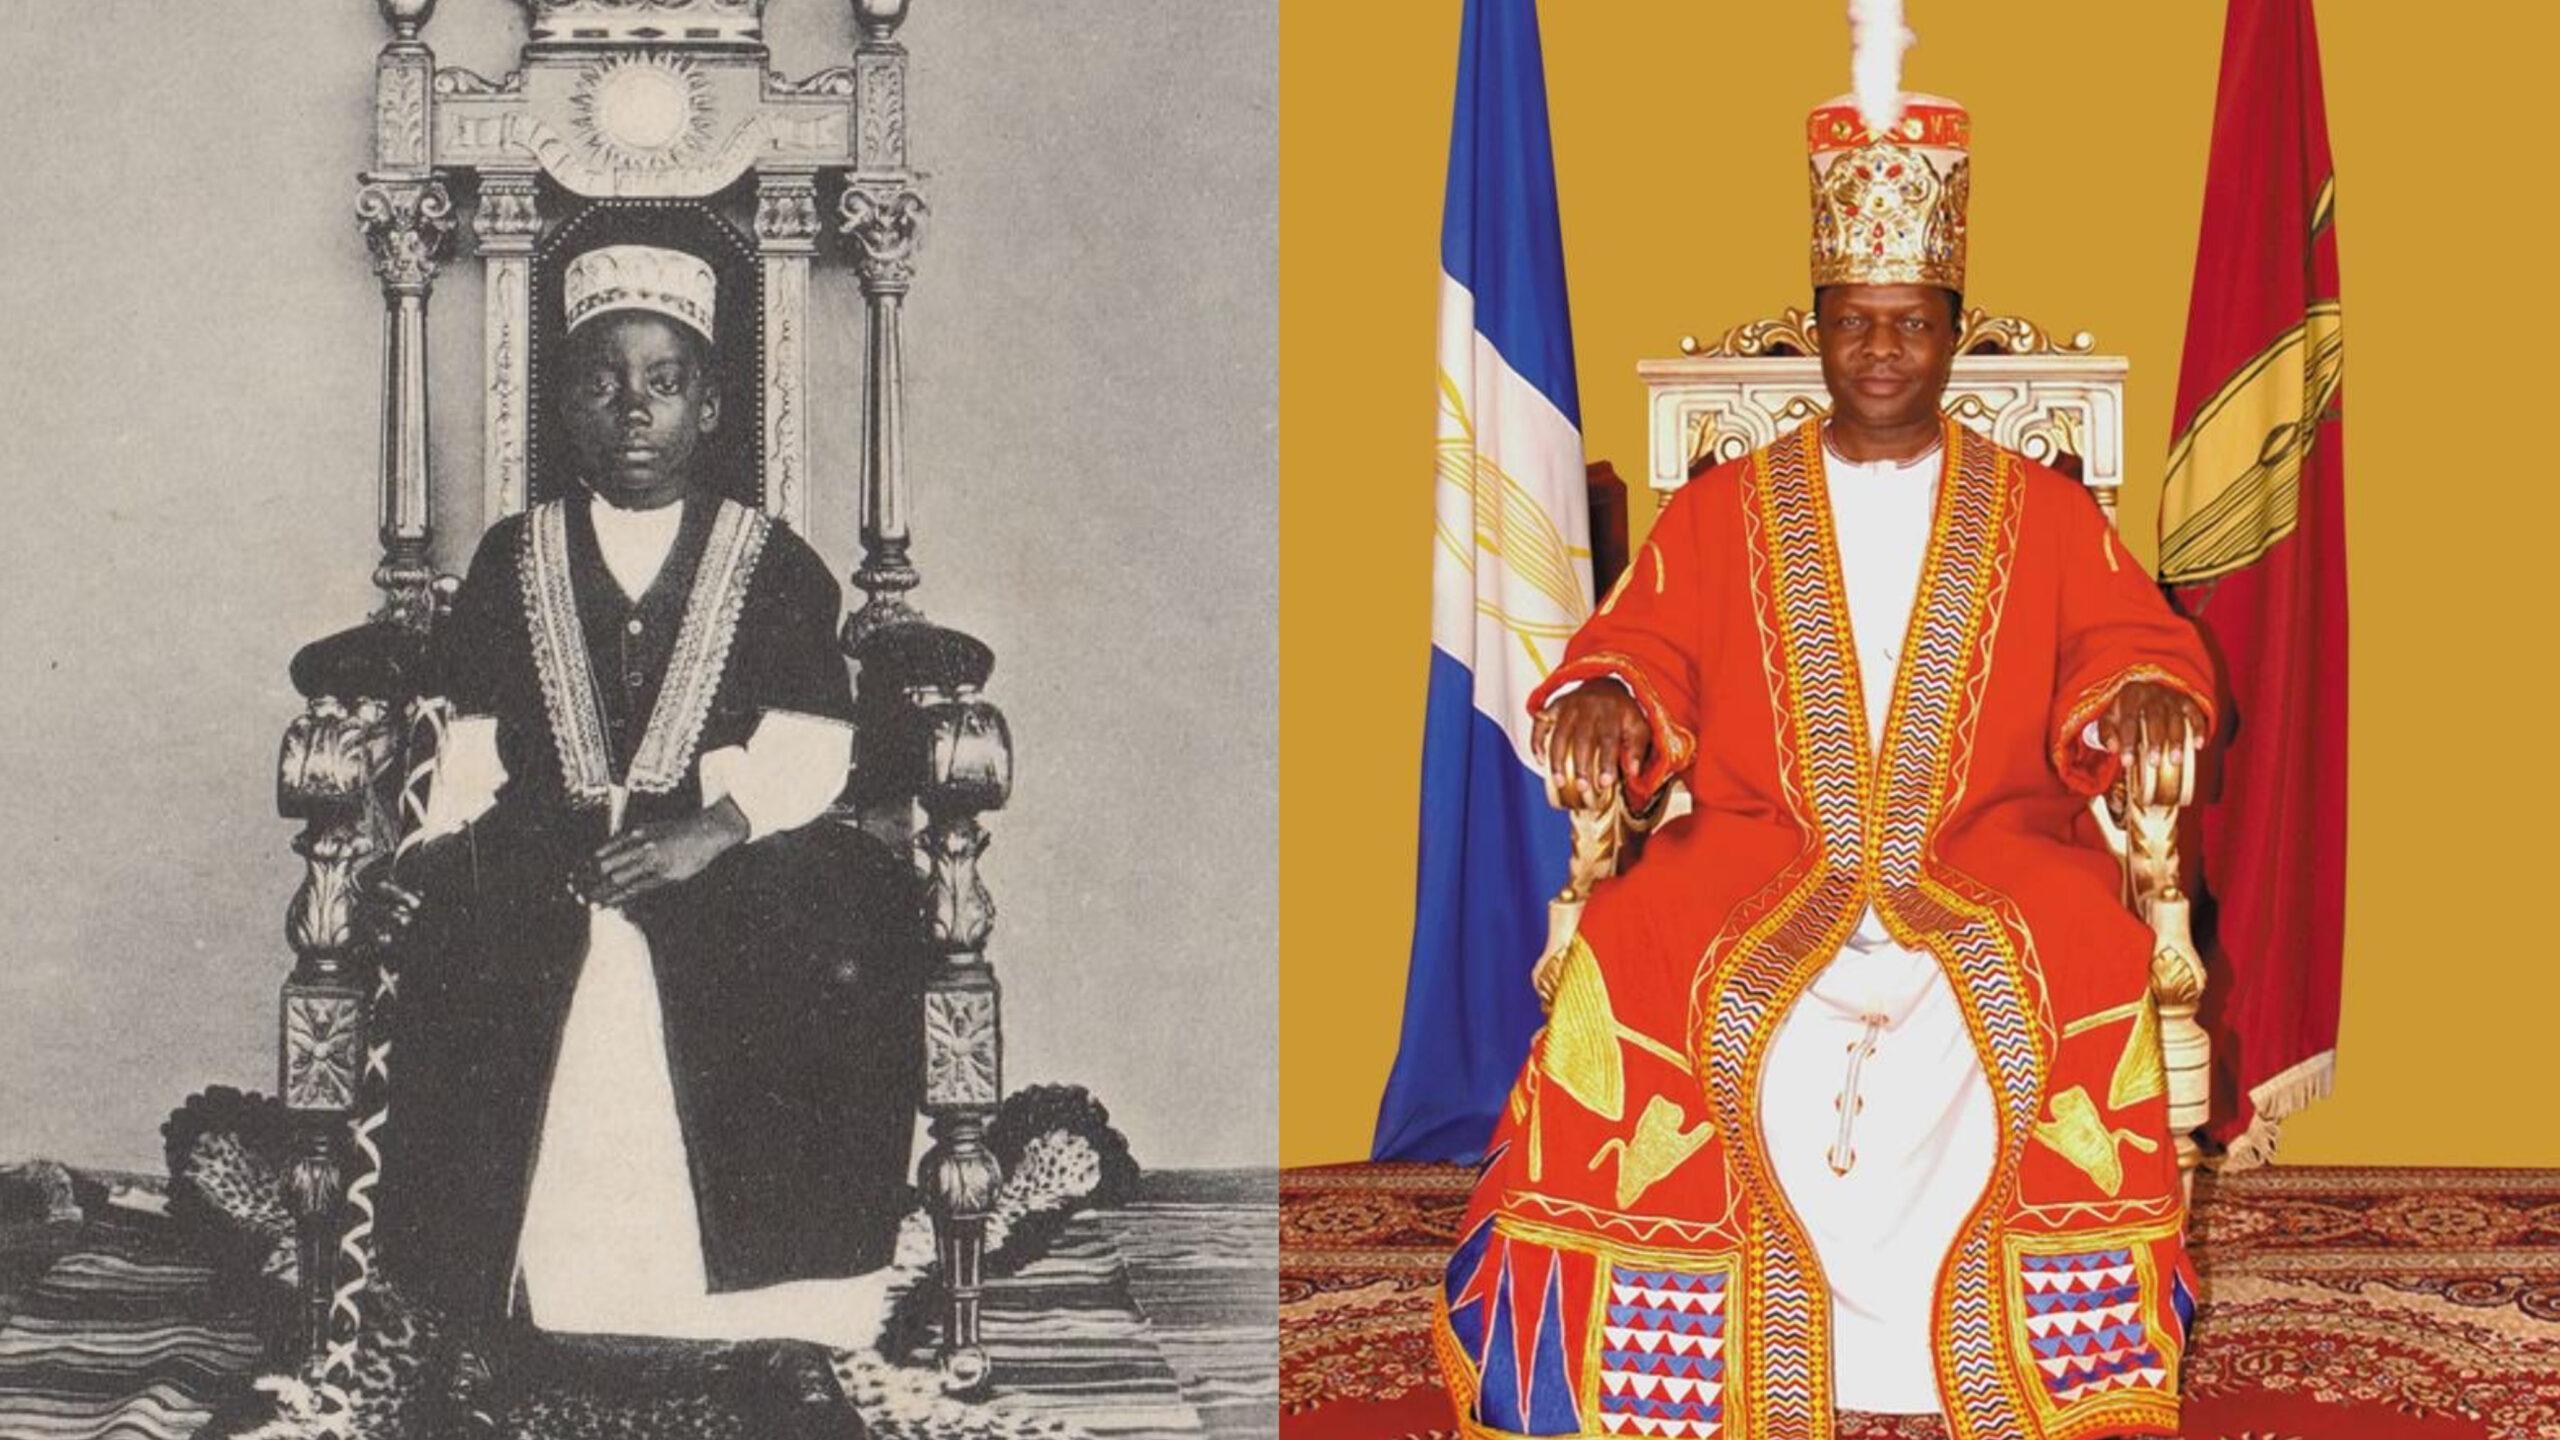 Buganda Kingdom, the largest of the traditional kingdoms in East Africa